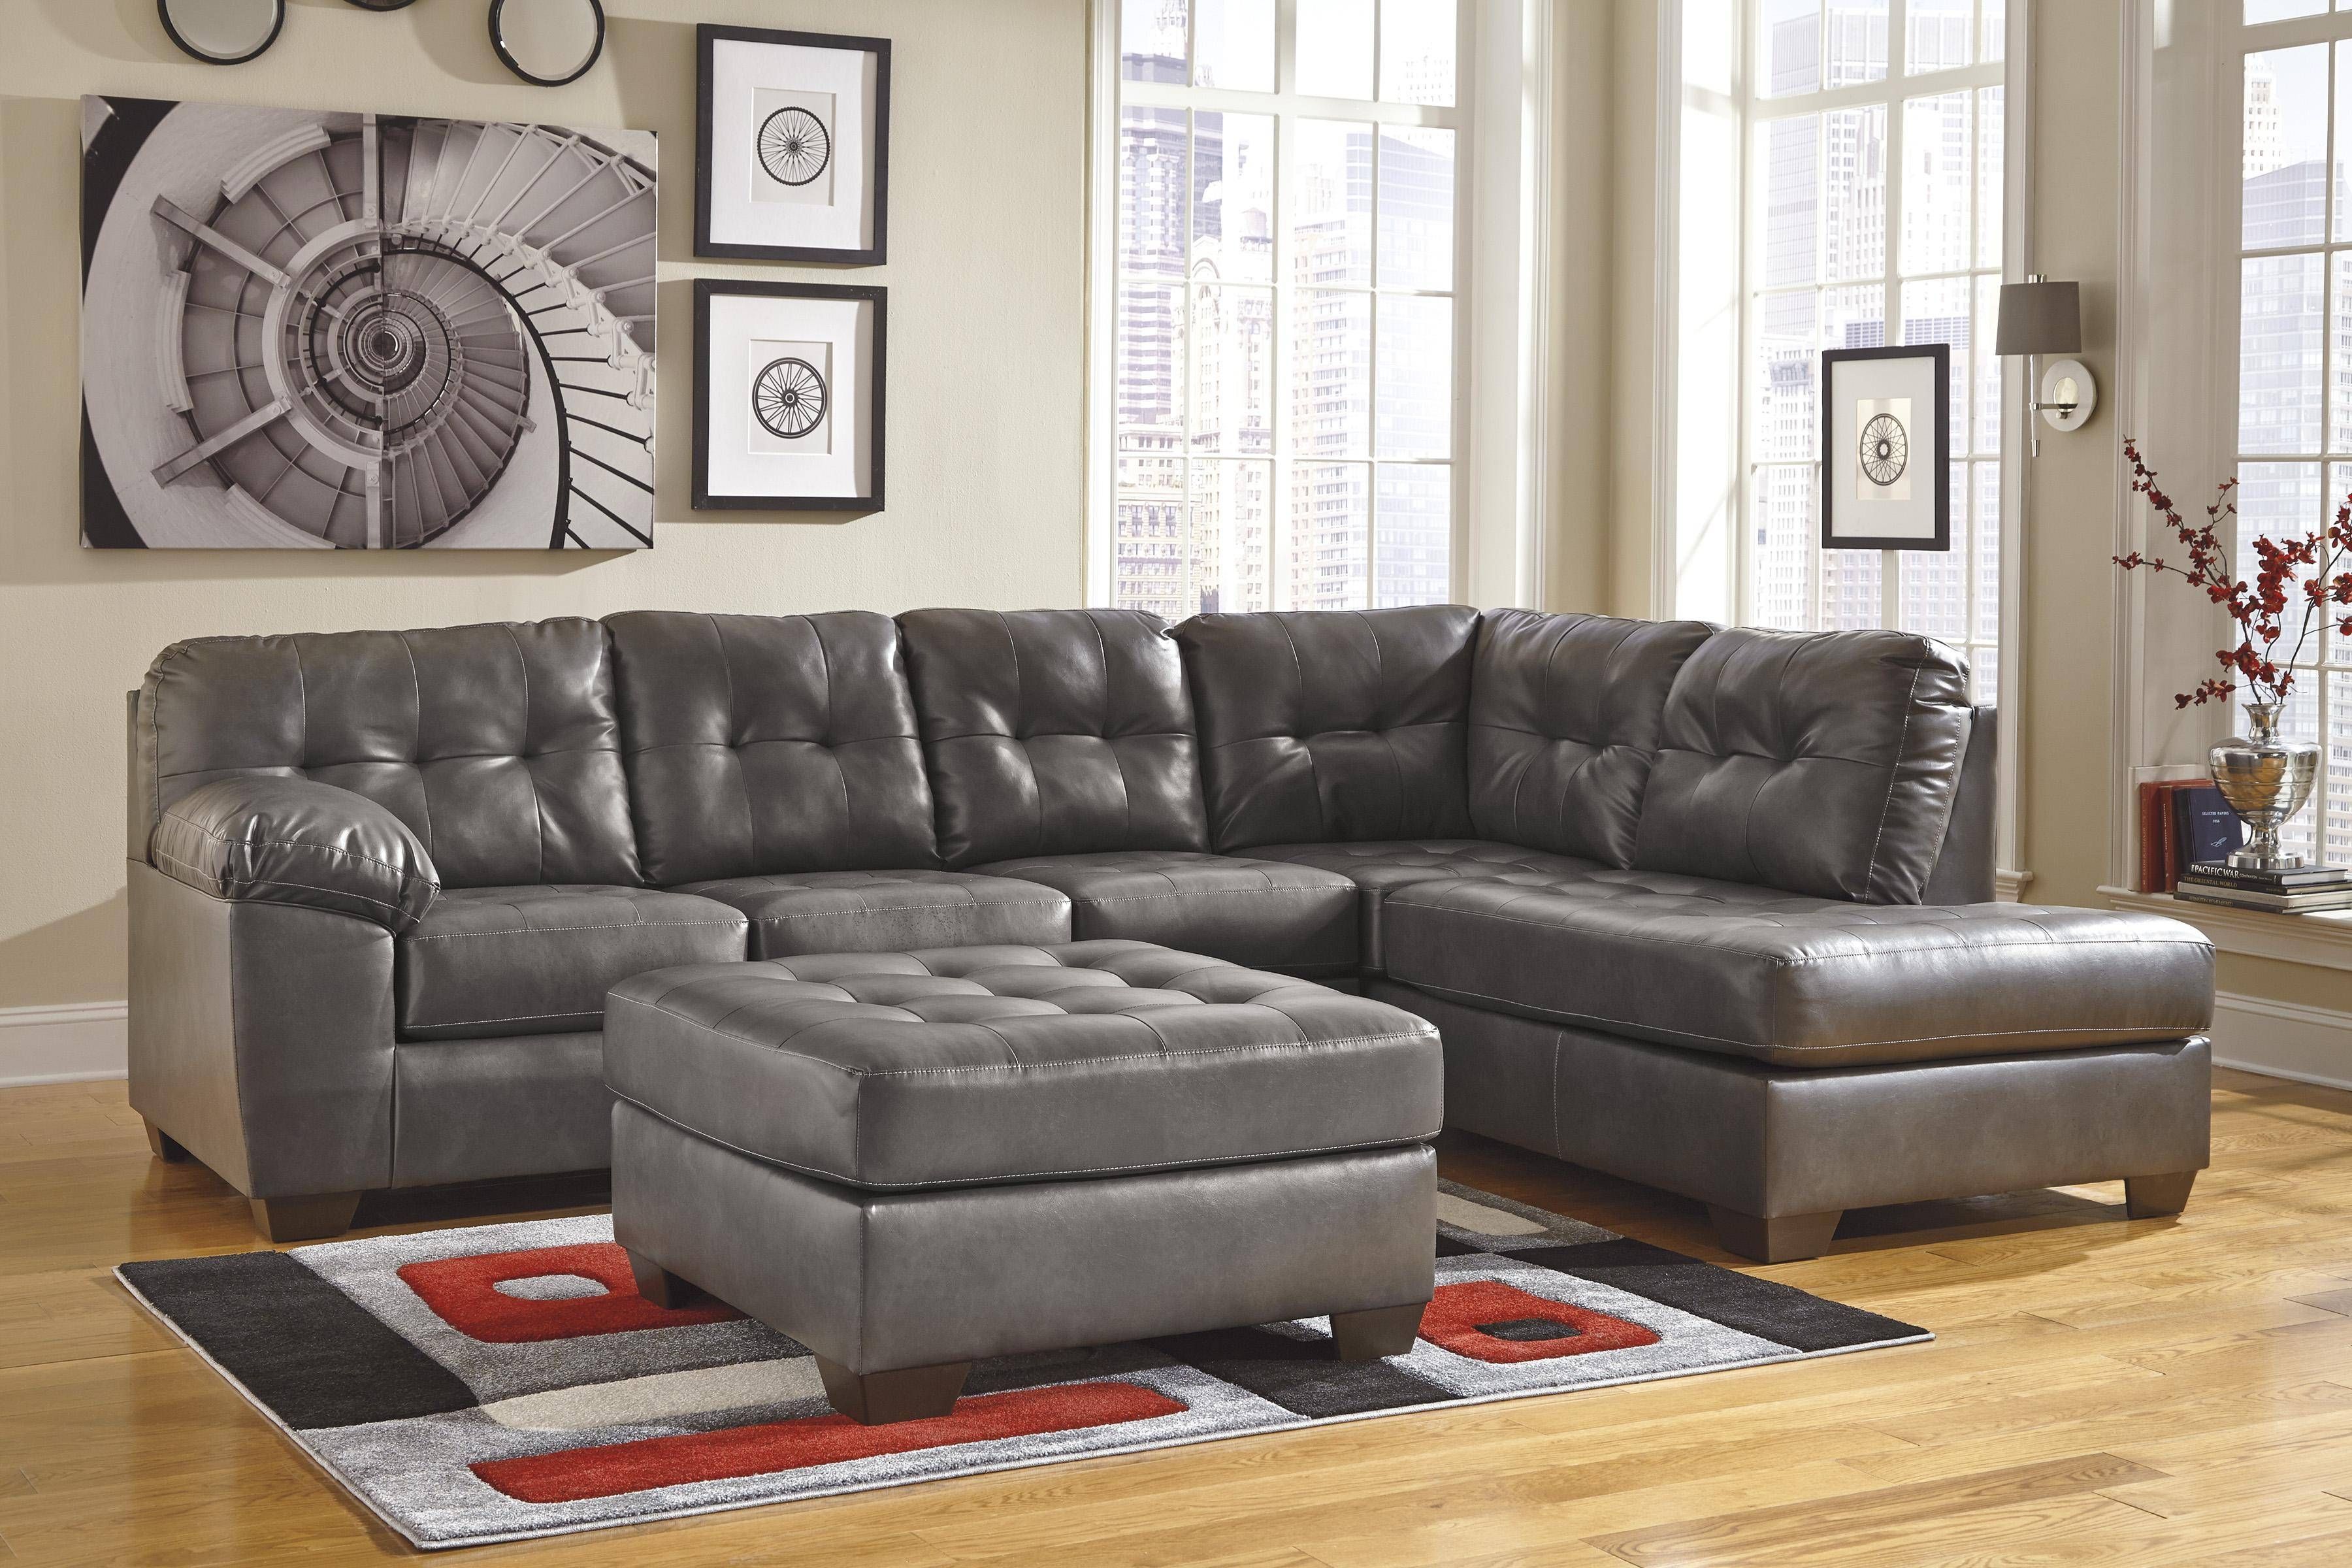 Living Room: Interesting Grey Leather Sectional For Modern Living For Gray Leather Sectional Sofas (View 16 of 30)